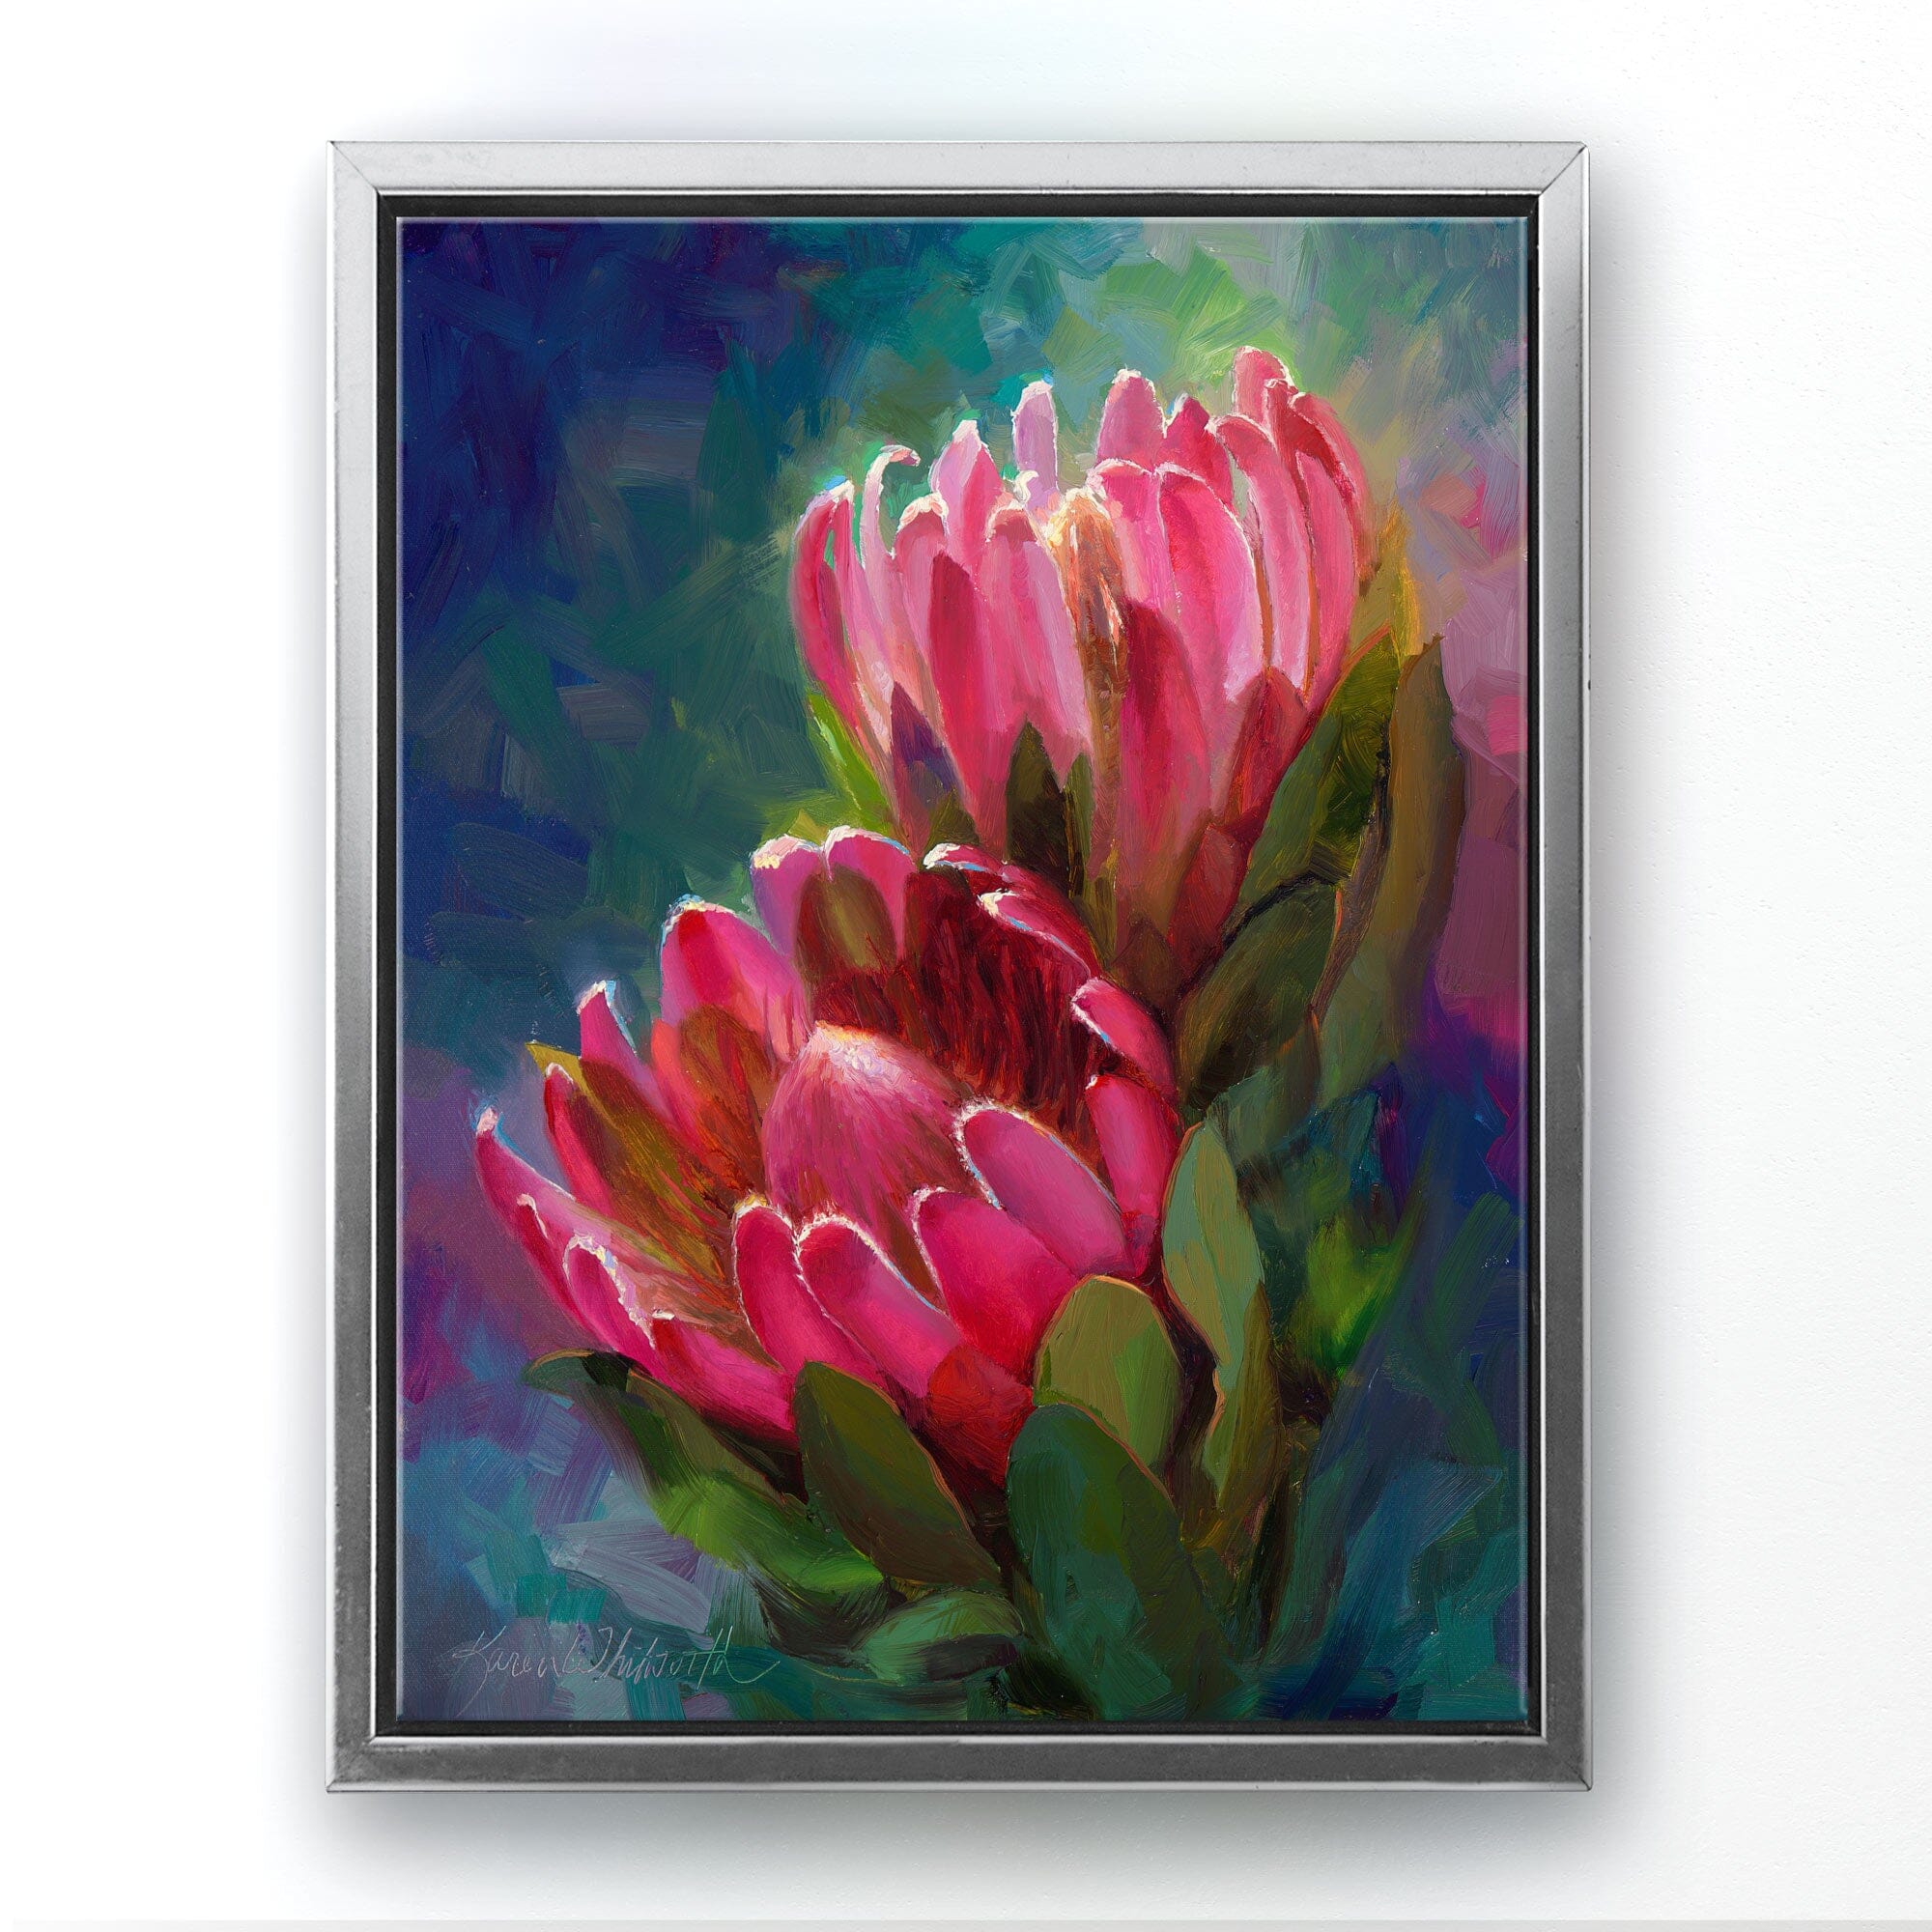 Protea canvas art of tropical pink flowers by floral artist Karen Whitworth. The artwork is framed in a silver floater frame and is hanging on a white wall. 